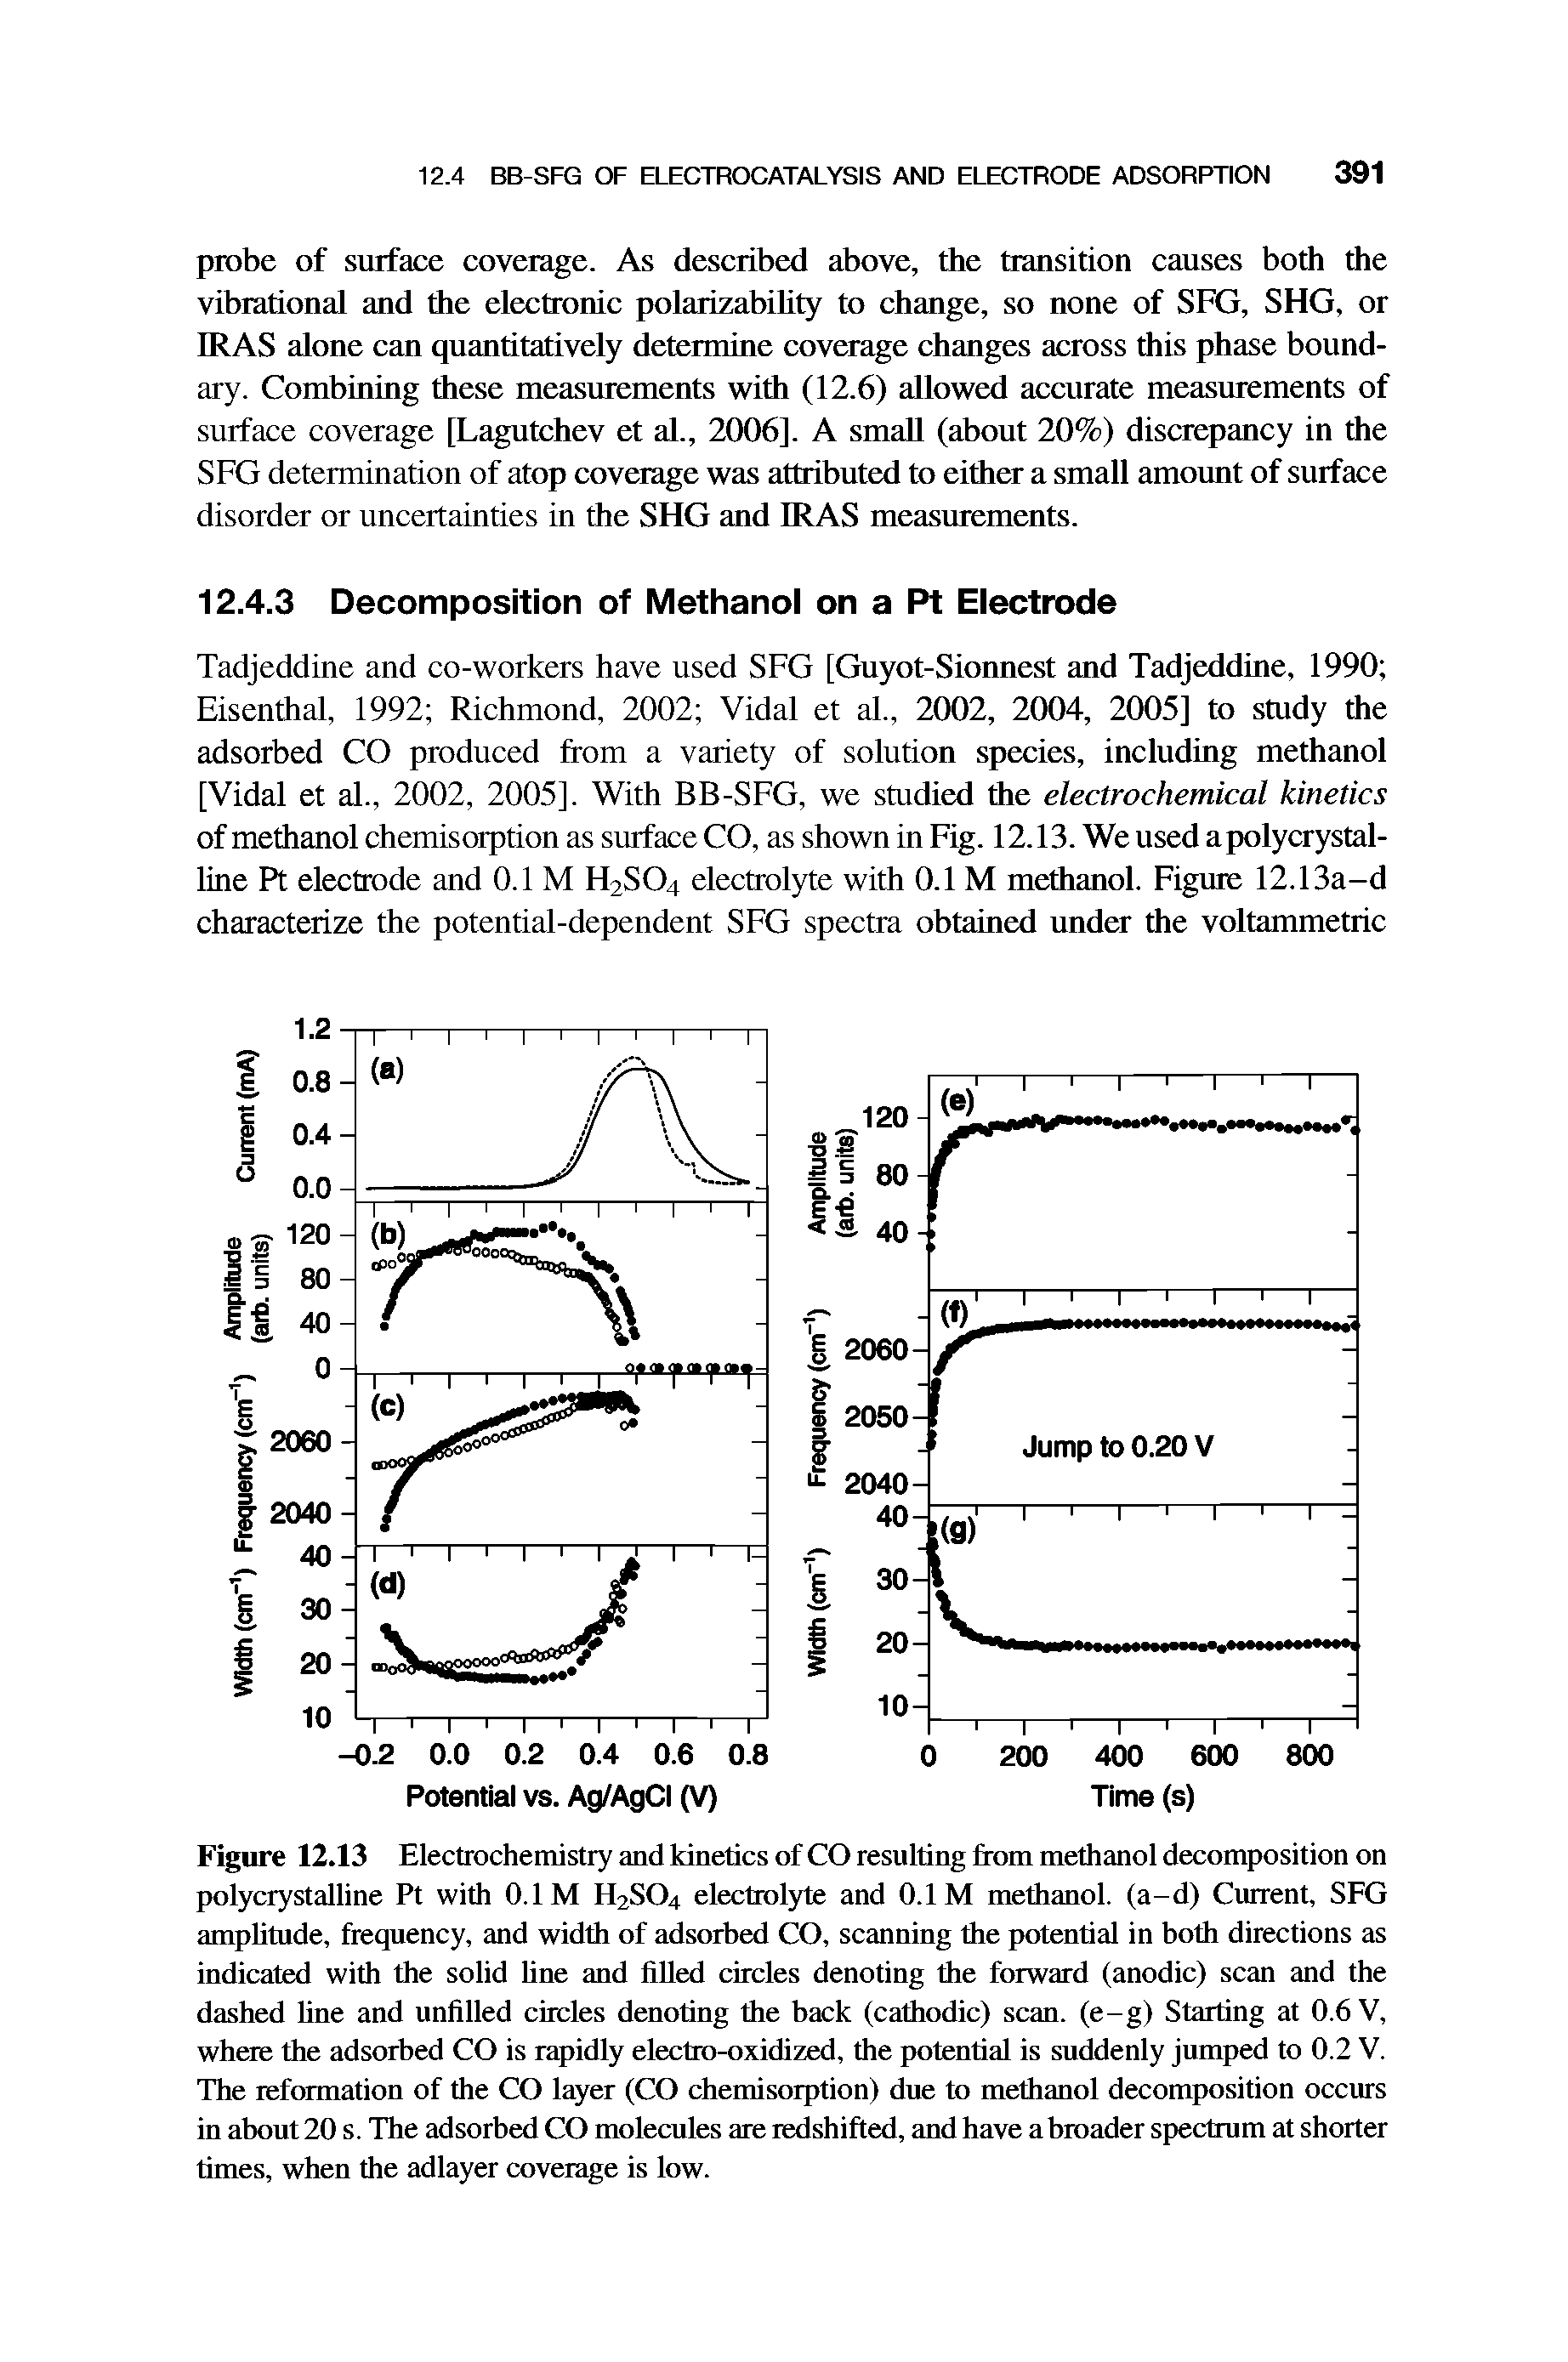 Figure 12.13 Electrochemistry and kinetics of CO resulting from methanol decomposition on polycrystalline Pt with O.IM H2SO4 electrol3de and 0.1 M methanol, (a-d) Current, SFG amphtude, frequency, and width of adsorbed CO, scanning the potential in both directions as indicated with the solid hne and fiUed circles denoting the forward (anodic) scan and the dashed hne and unfilled circles denoting the back (cathodic) scan, (e-g) Starting at 0.6 V, where the adsorbed CO is rapidly electro-oxidized, the potential is suddenly jumped to 0.2 V. The reformation of the CO layer (CO chemisorption) due to methanol decomposition occurs in about 20 s. The adsorbed CO molecules are redshifted, and have a broader spectrum at shorter times, when the adlayer coverage is low.